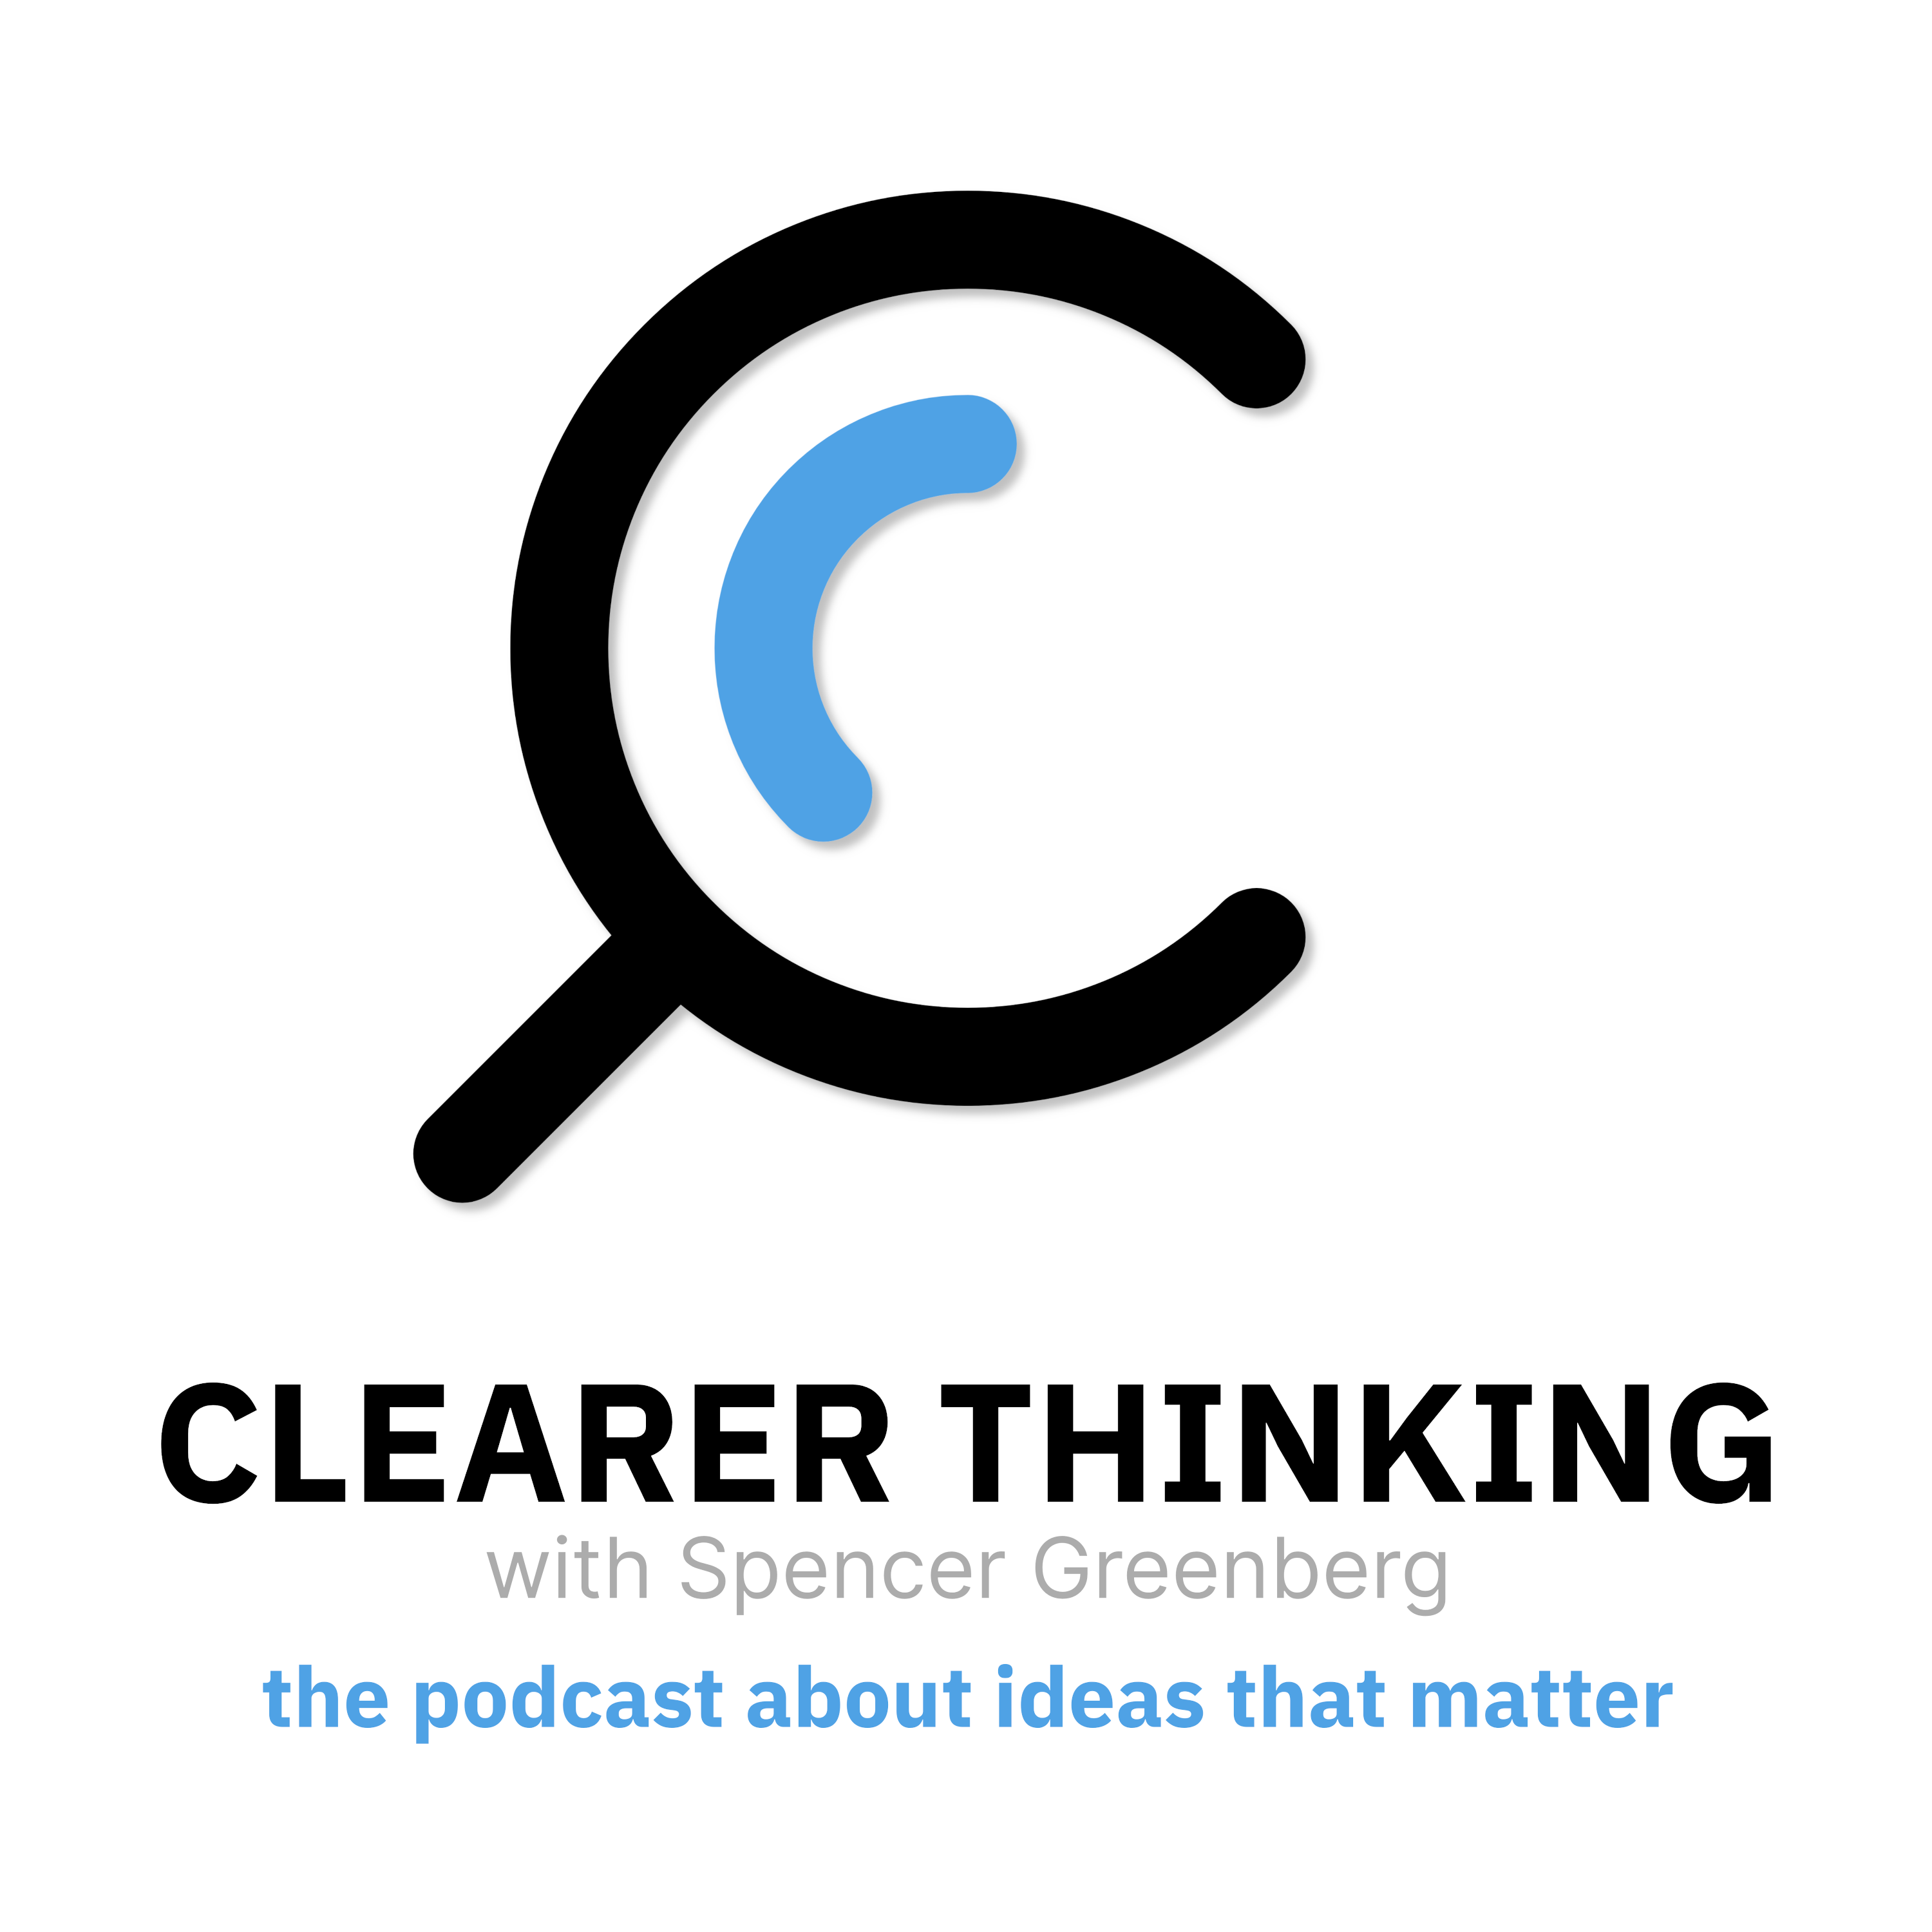 Clearer Thinking with Spencer Greenberg podcast